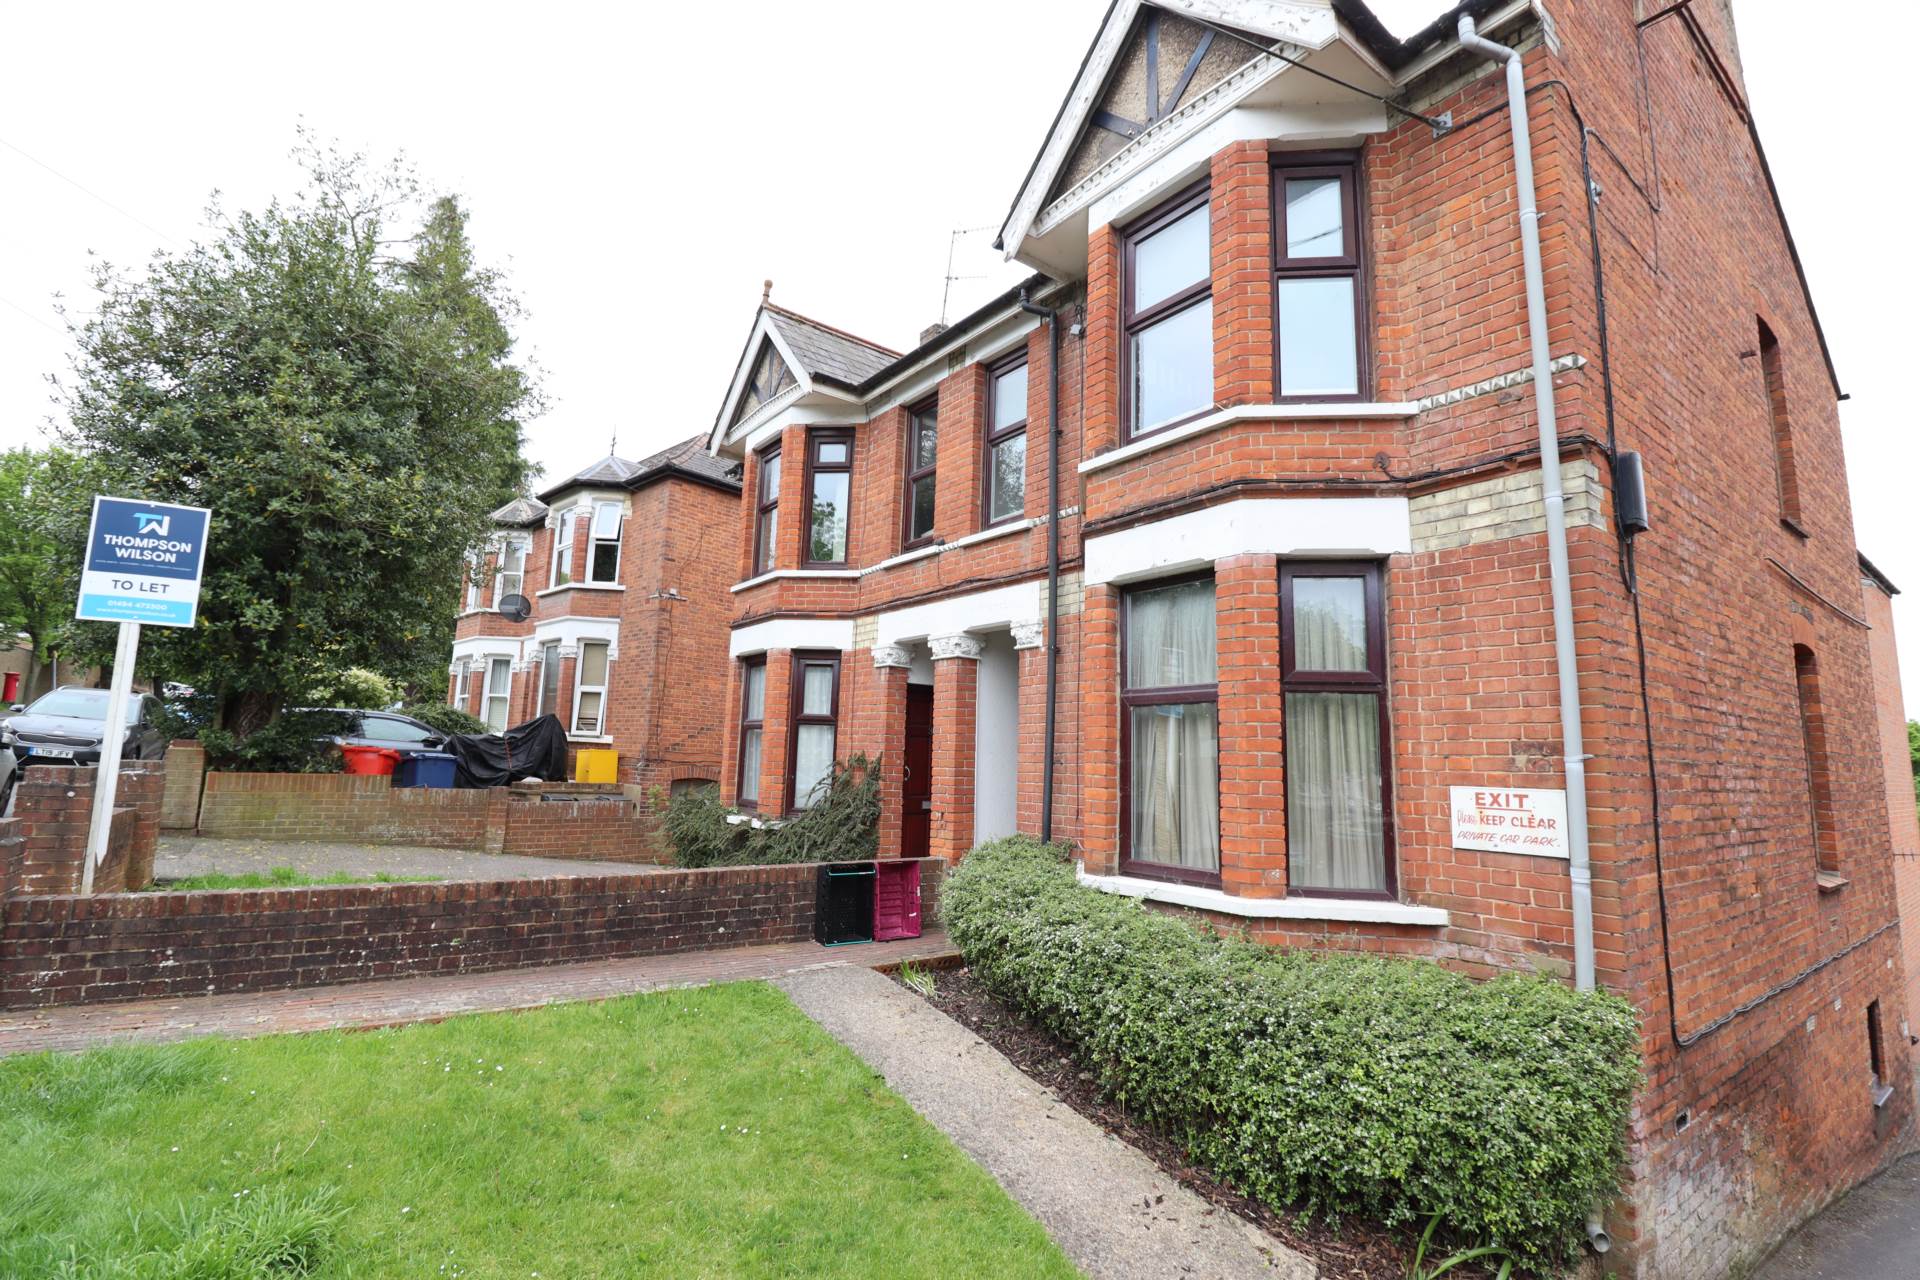 2 bed Flat for rent in Downley. From Eden Sales & Lettings - High Wycombe